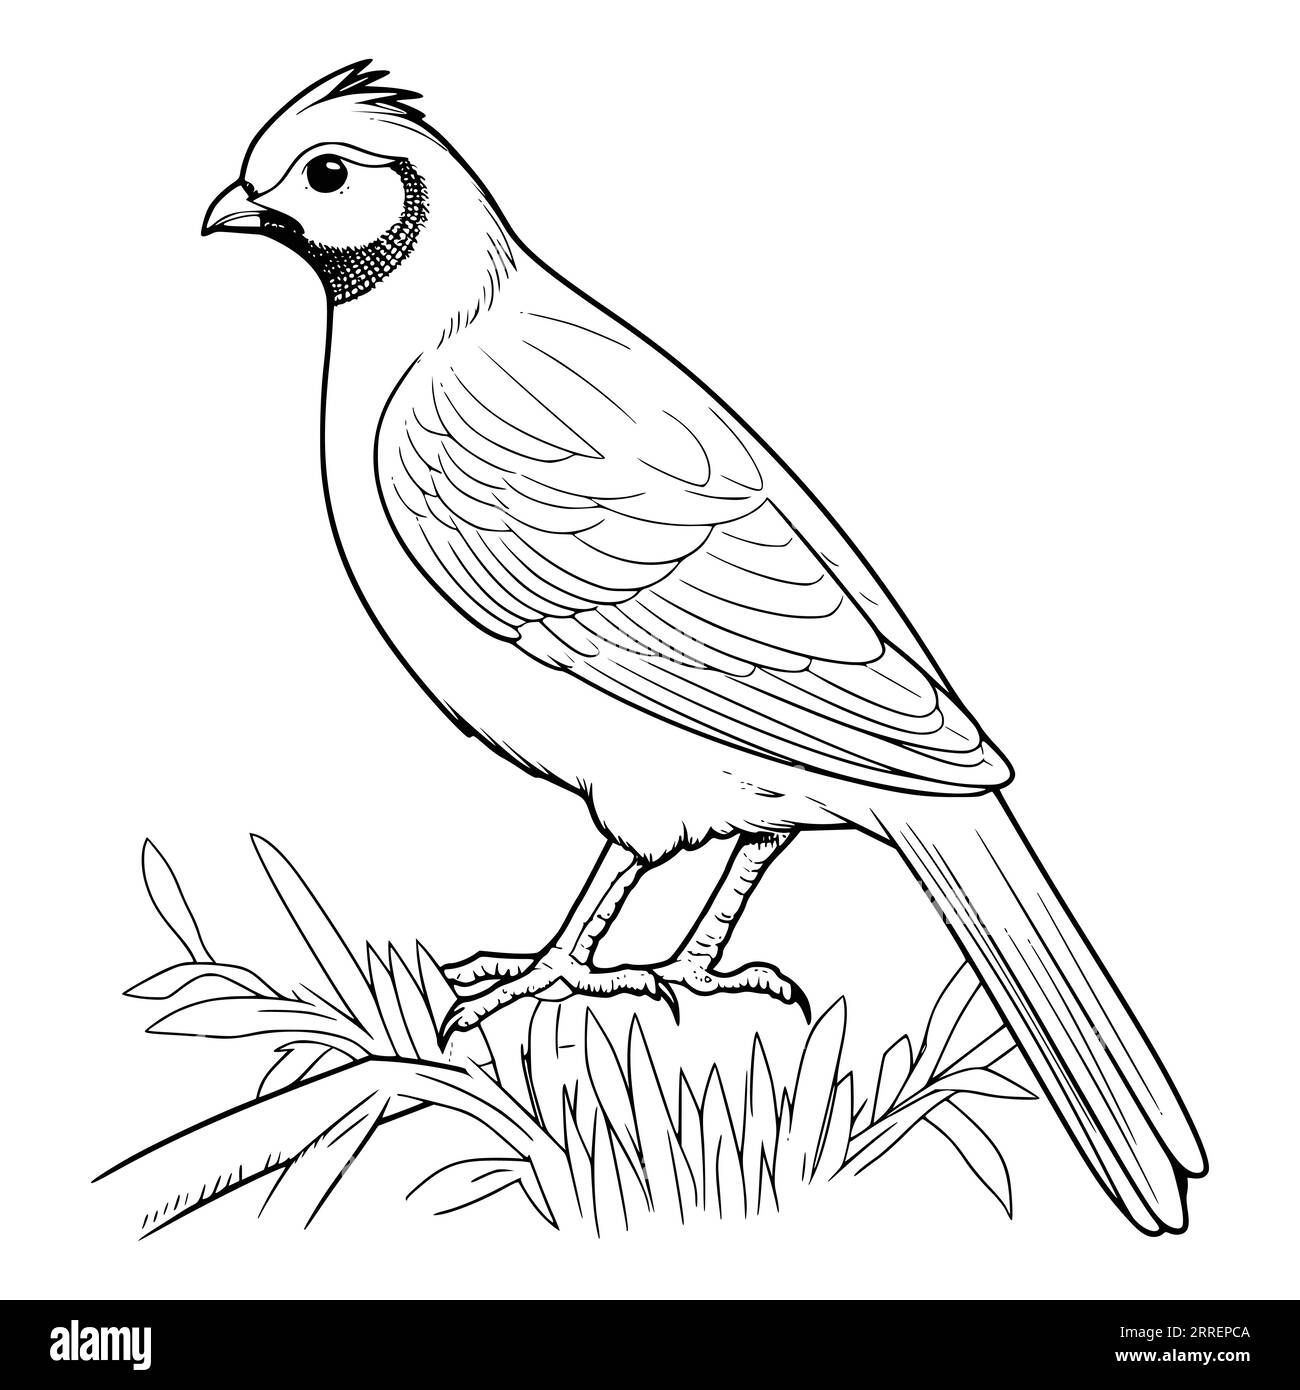 Quail Coloring Page for Kids Stock Vector